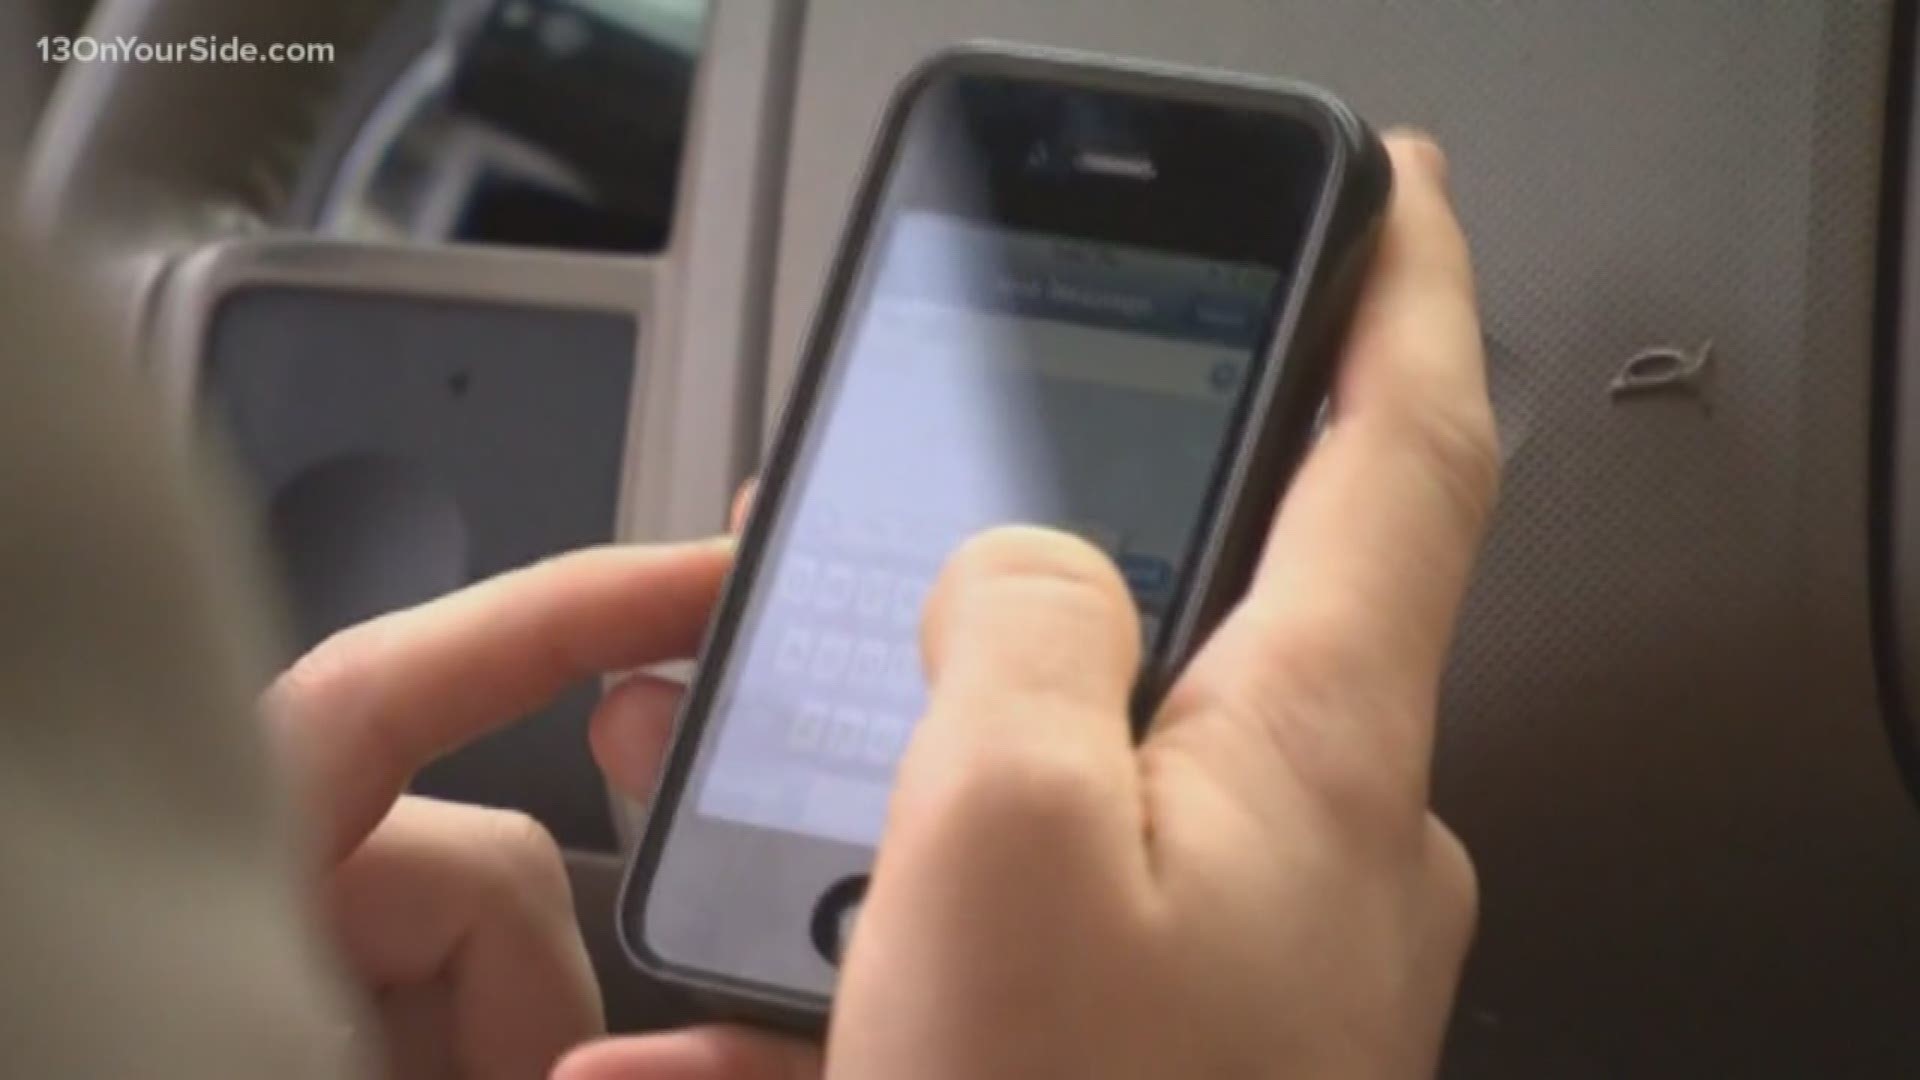 Gov. Gretchen Whitmer and safety advocates want to combat distracted driving by restricting the use of cellphones.